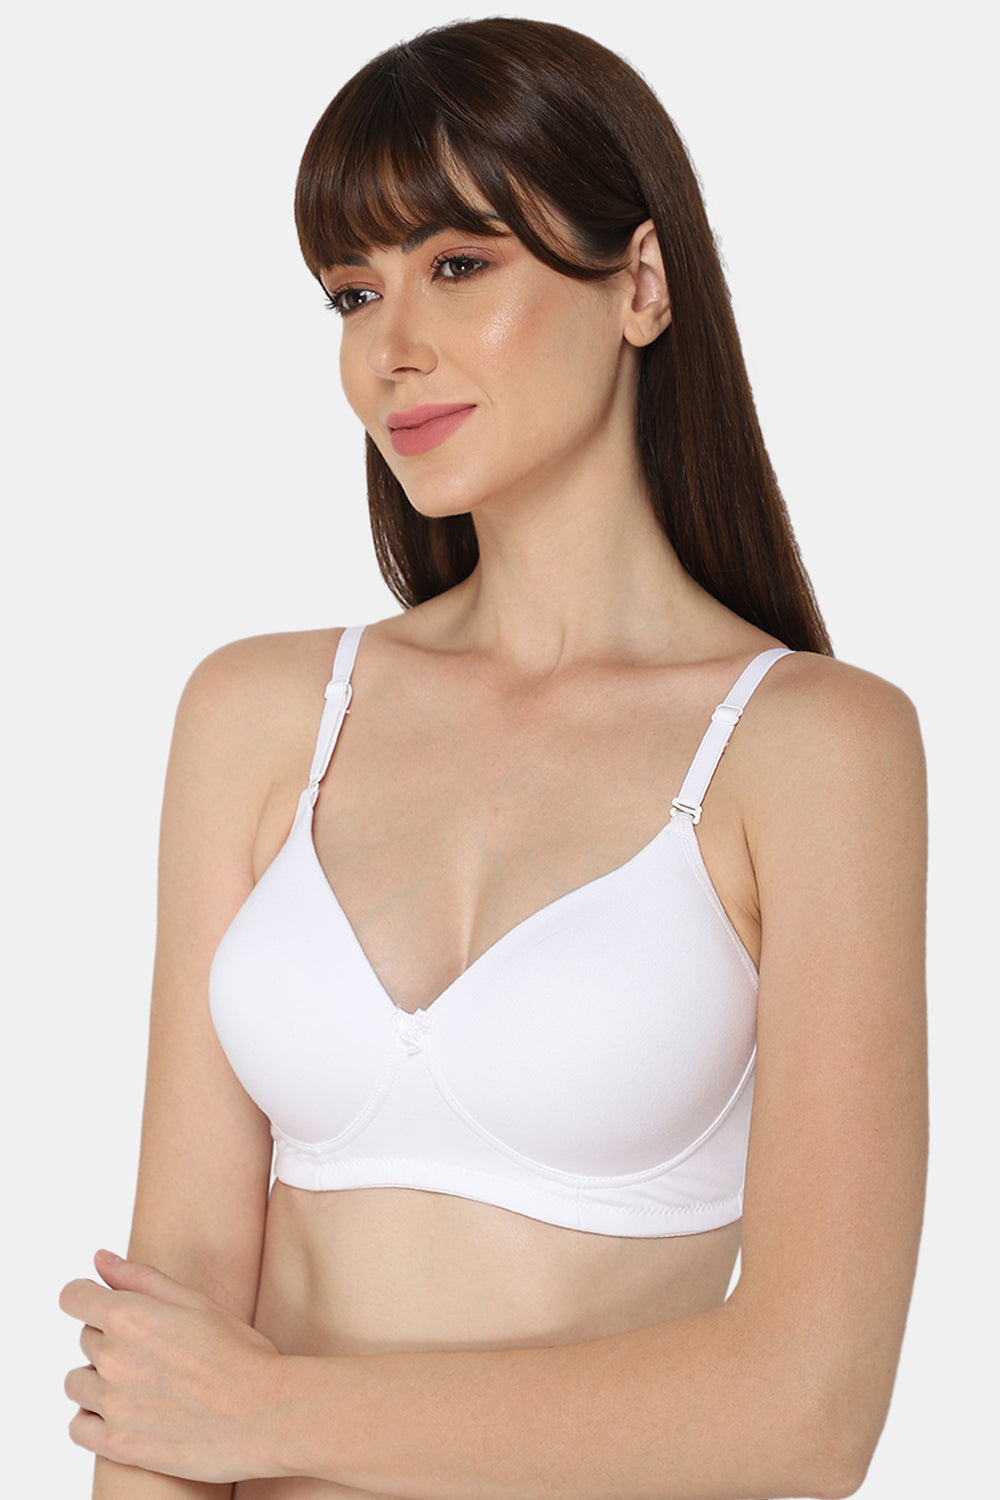 Buy SOUMINIE Women's Soft Fit Cotton White Non Padded Bra-32C at